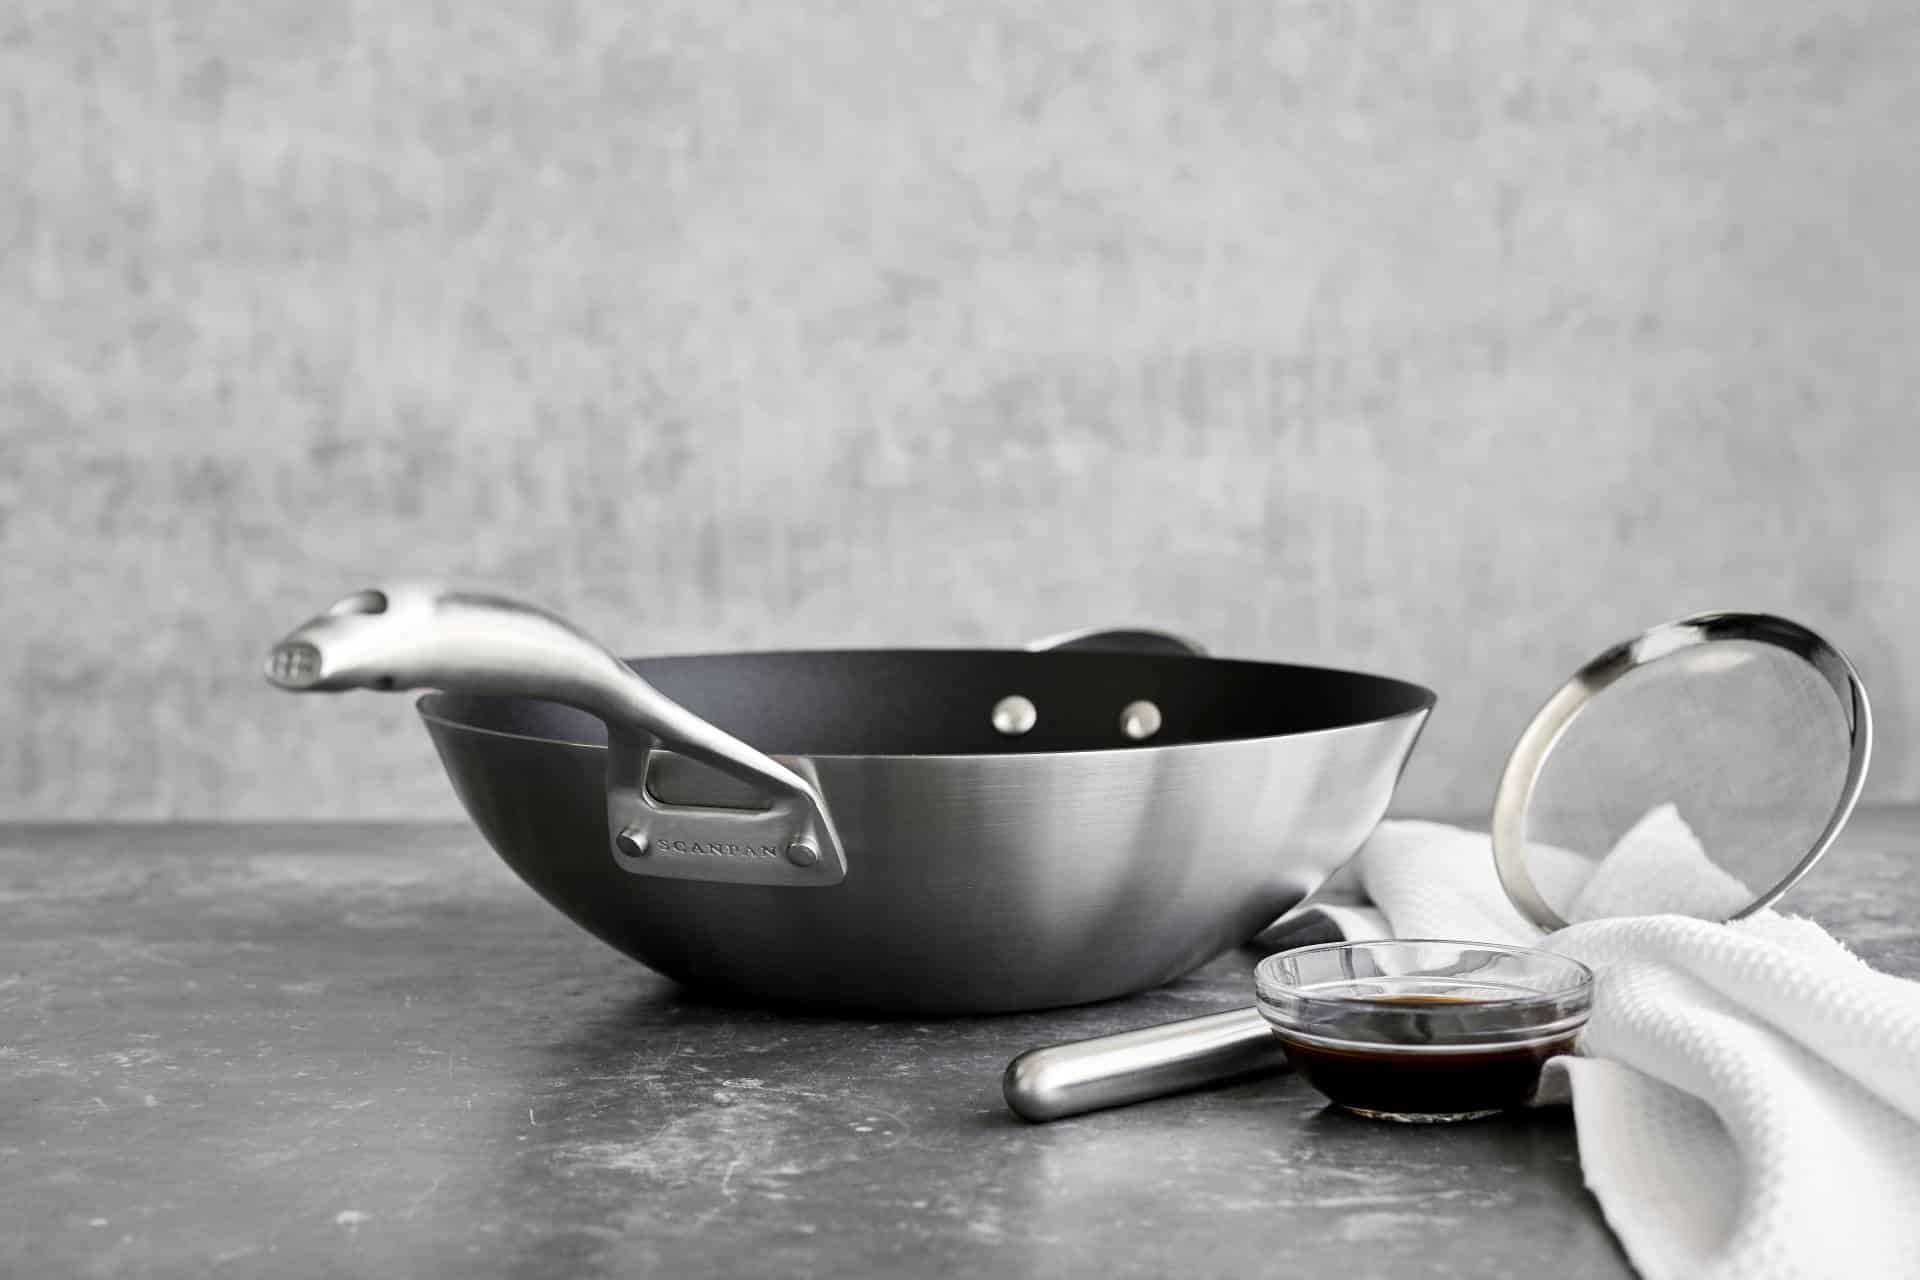 How to Choose the Best Woks for Home Kitchens